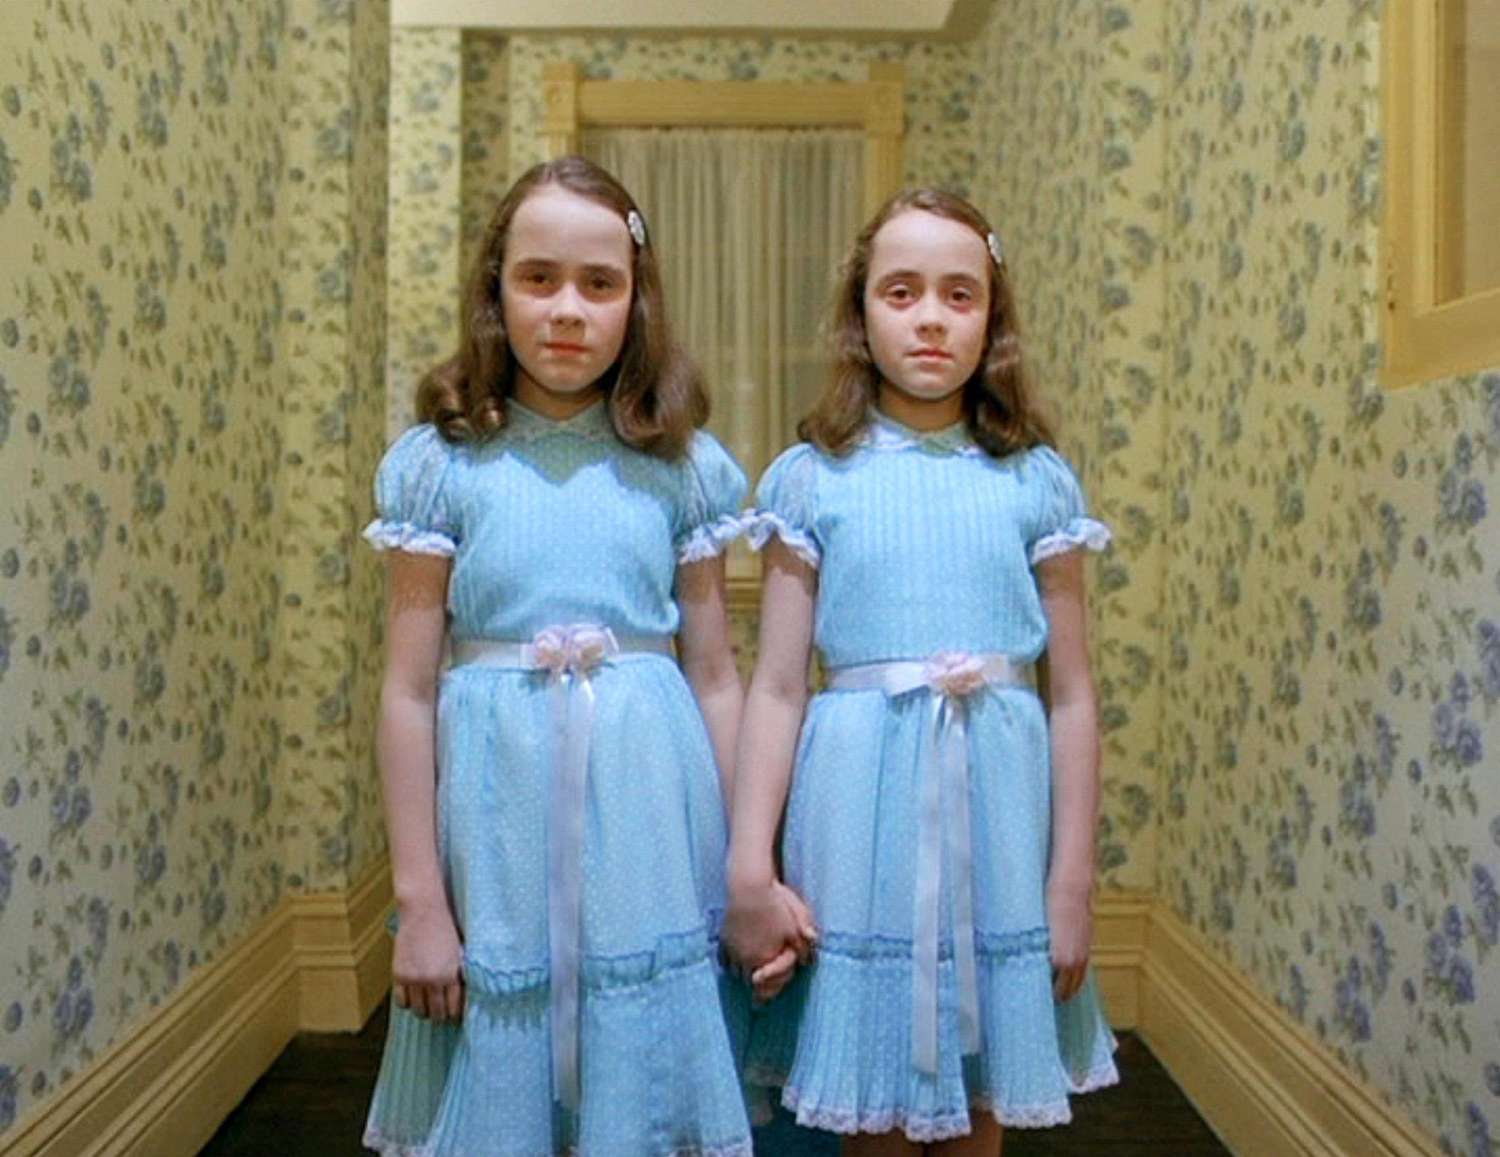 The Grady Twins: The Ghostly Sisters from The Shining